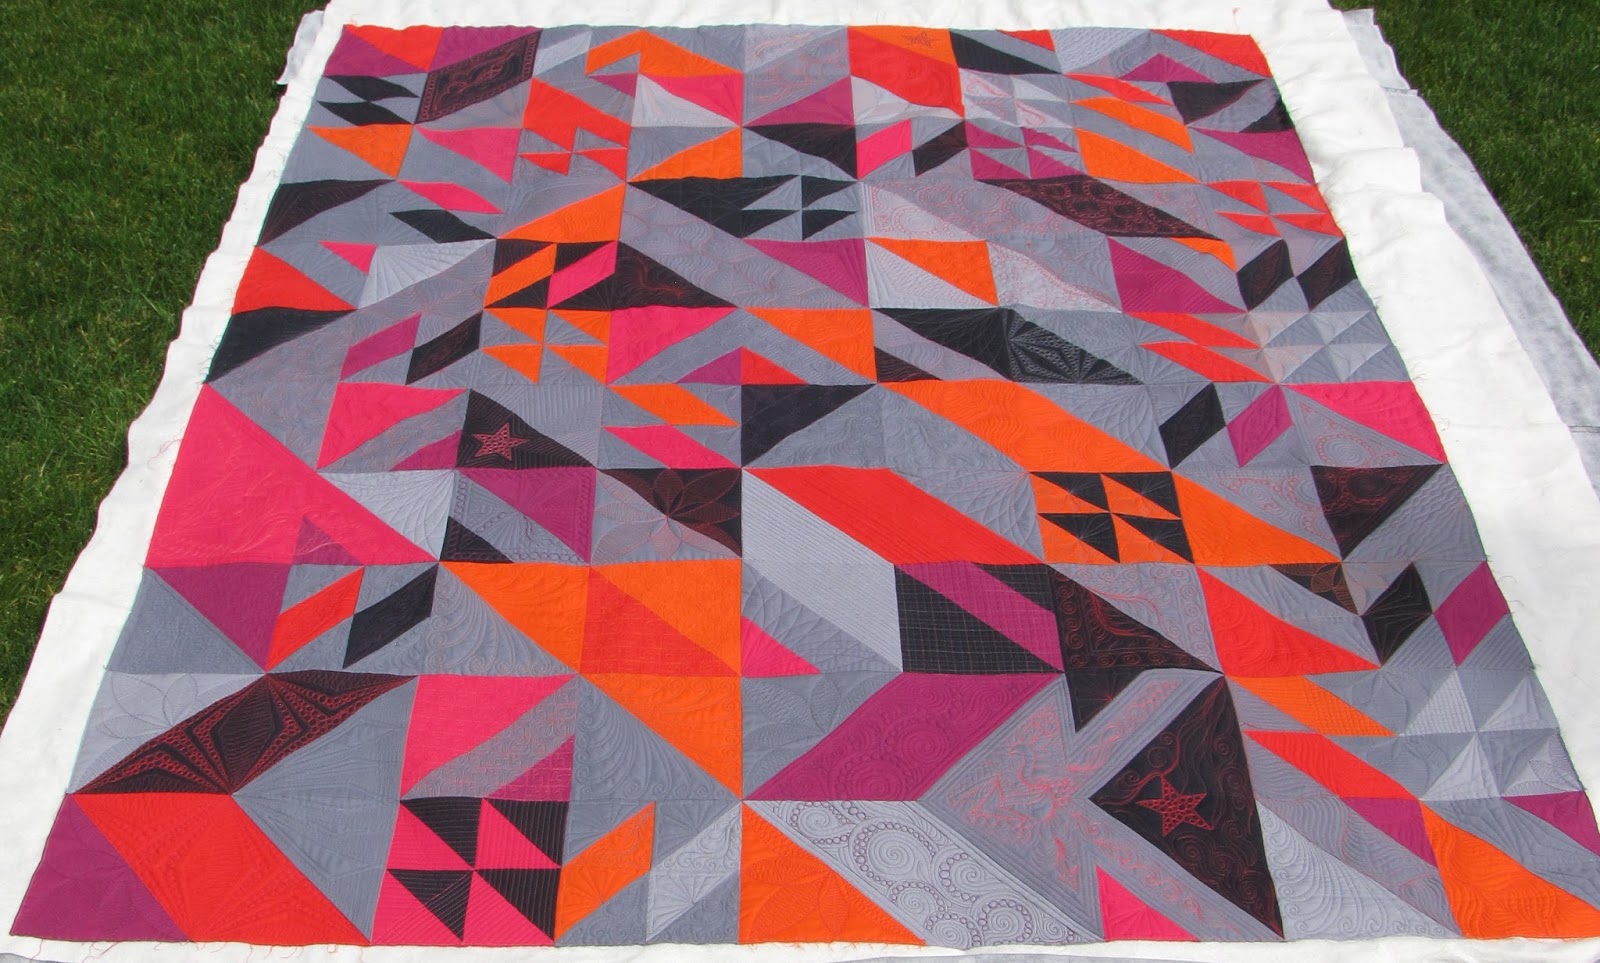 Amy S Free Motion Quilting Adventures Create Some Graffiti Quilting